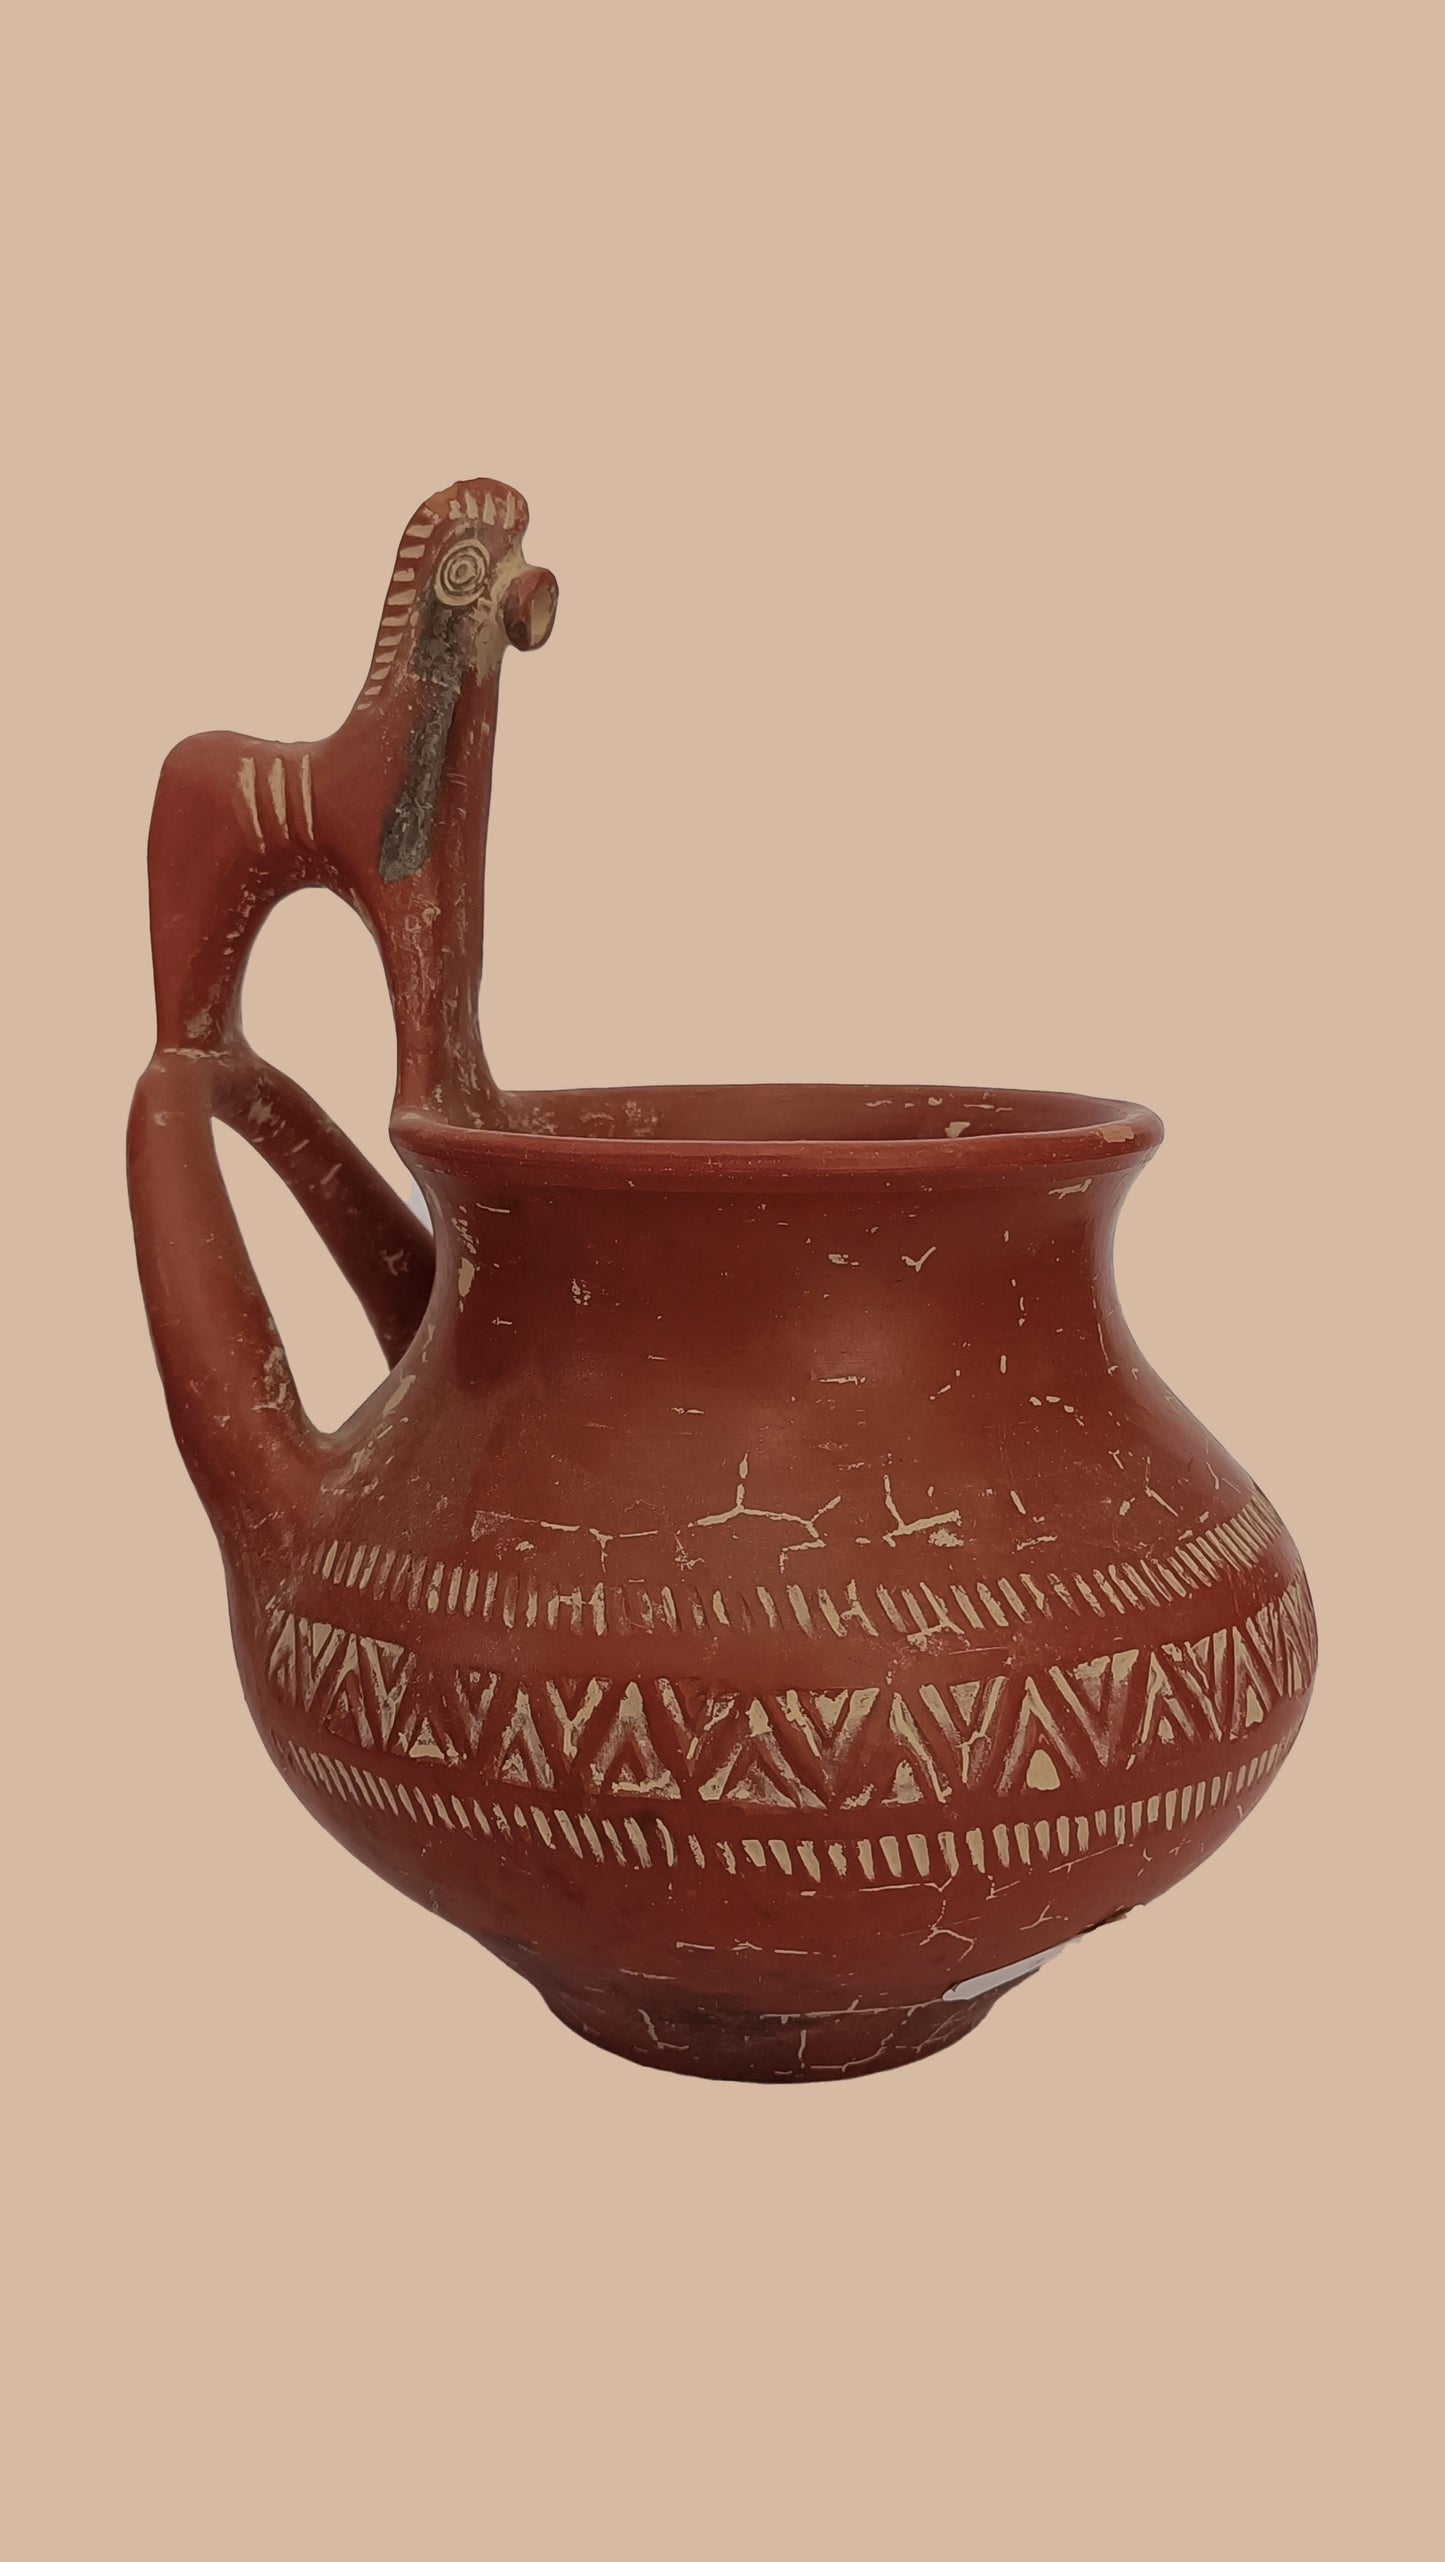 9 - Cypriot Bronze Age Pot with Horse